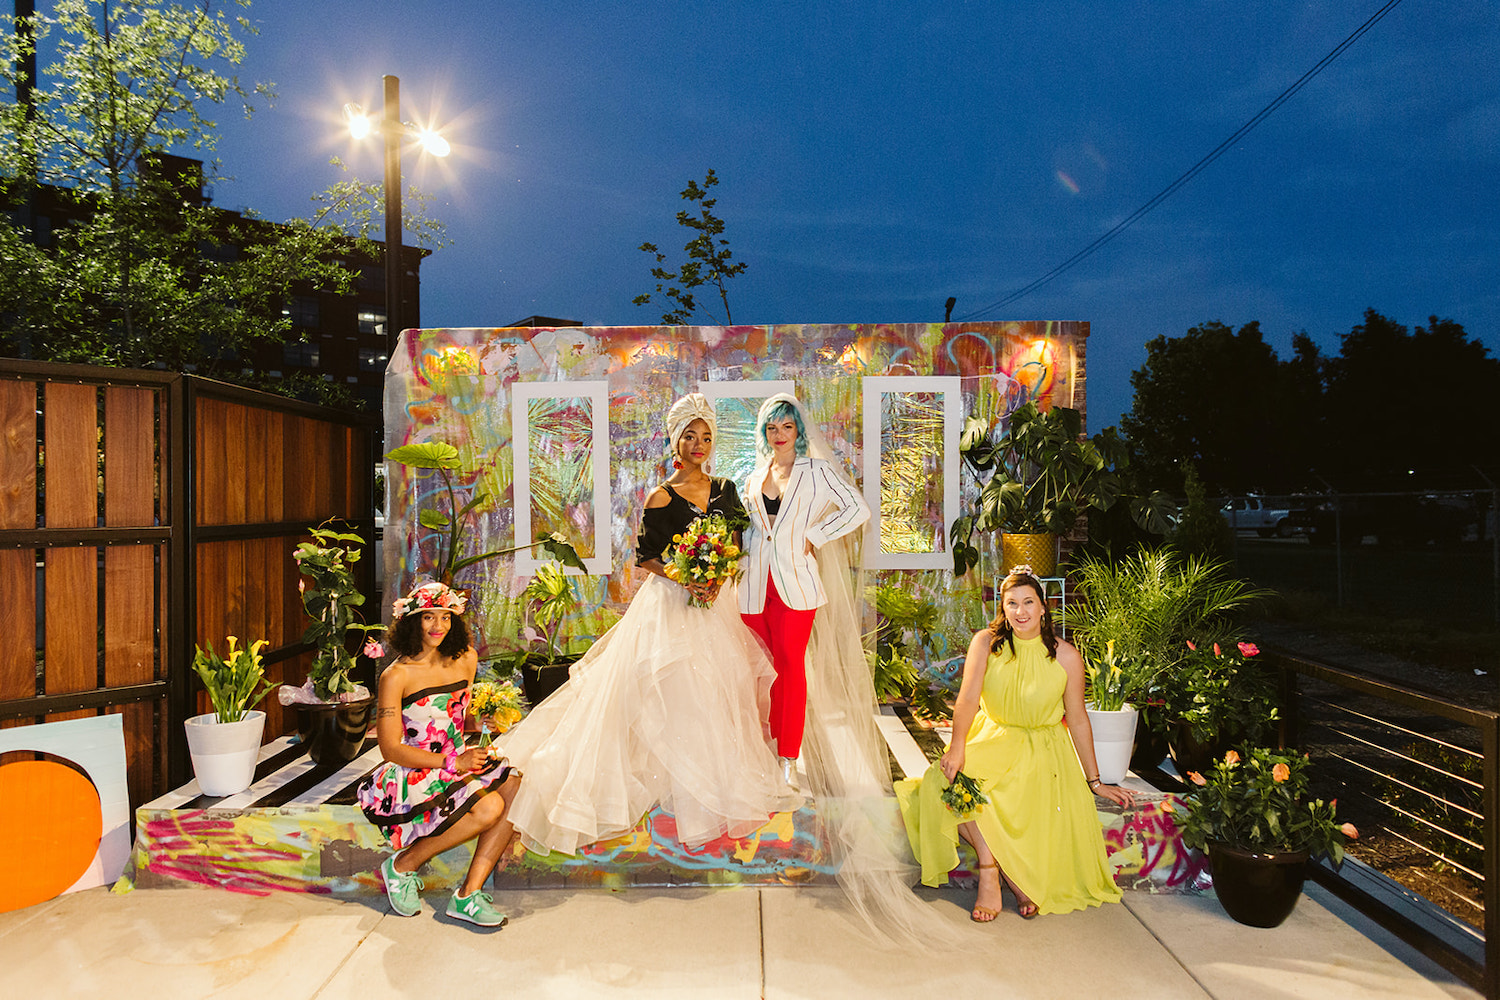 two brides and two bridesmaids wear bright, colorful wedding attire on an artistically painted platform and backdrop